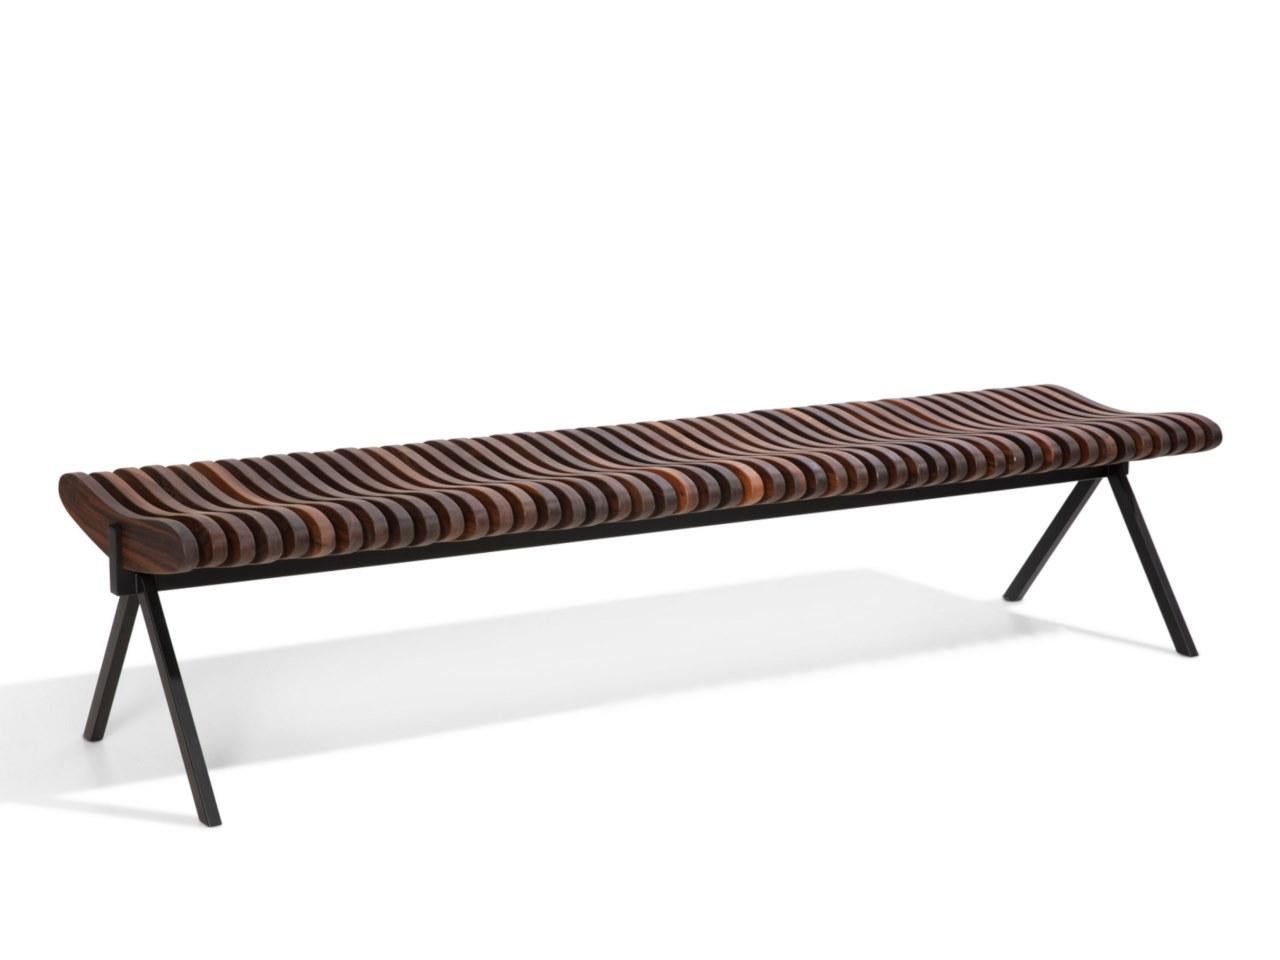 Perlude walnut natural large by Caroline Voet.
Dimensions: 190 x H 43 cm
Materials: Walnut natural
Also available in Oak natural, seating oak black, seating teak (outdoor). 

The PRELUDE benches are assembled from top grade FSC-labelled wood,